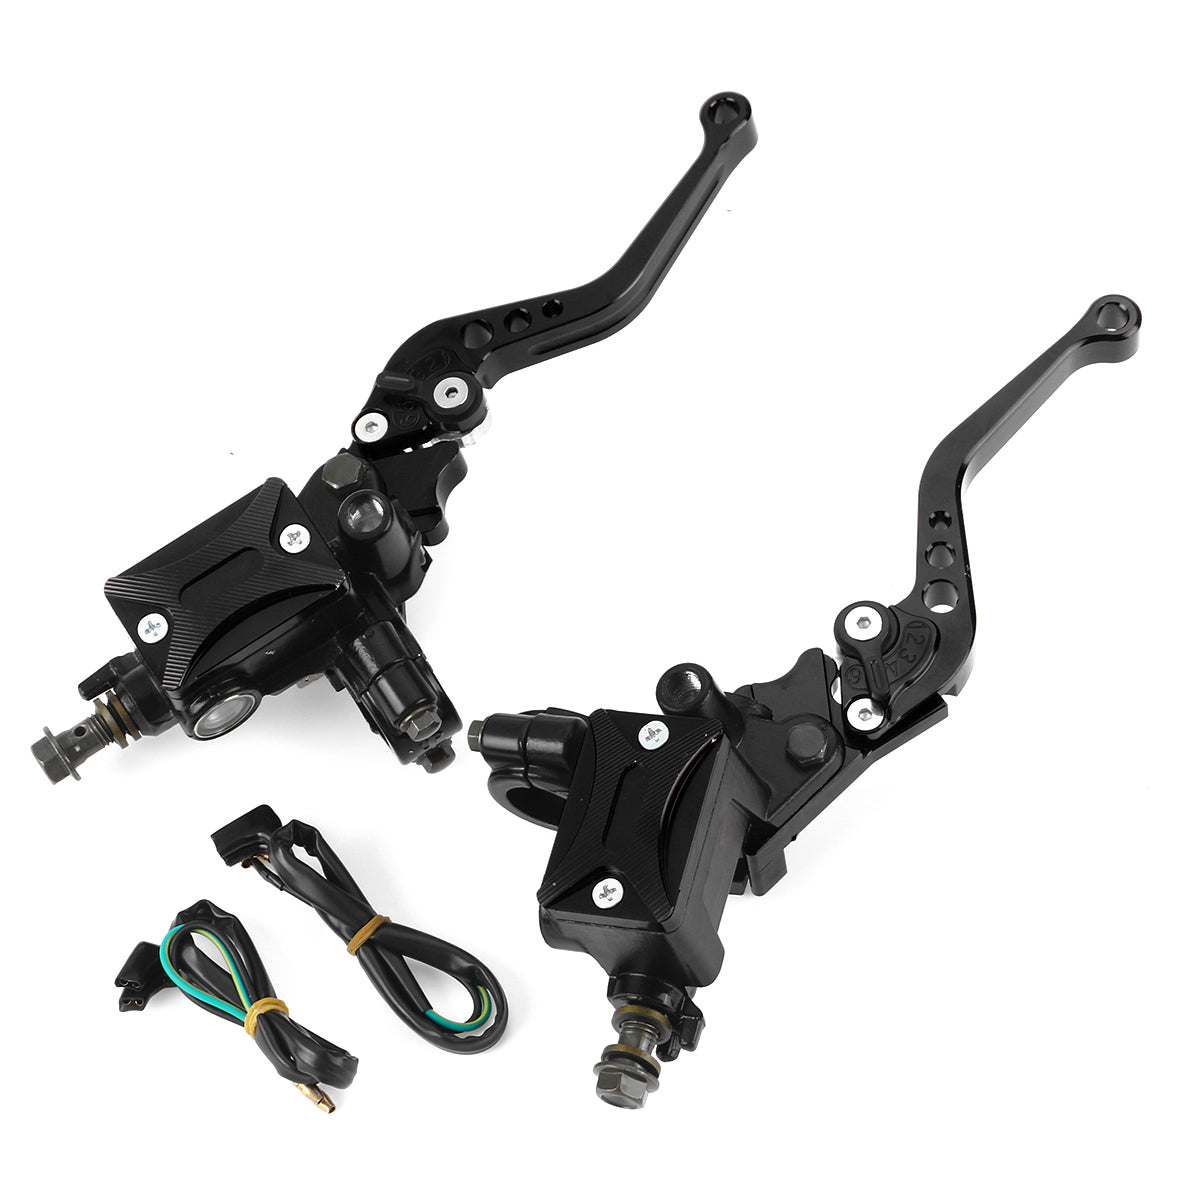 Black 7/8 Inch 22mm Motorcycle Hydraulic Brake Clutch Master Cylinder Reservoir Lever With Cable Aluminum Universal